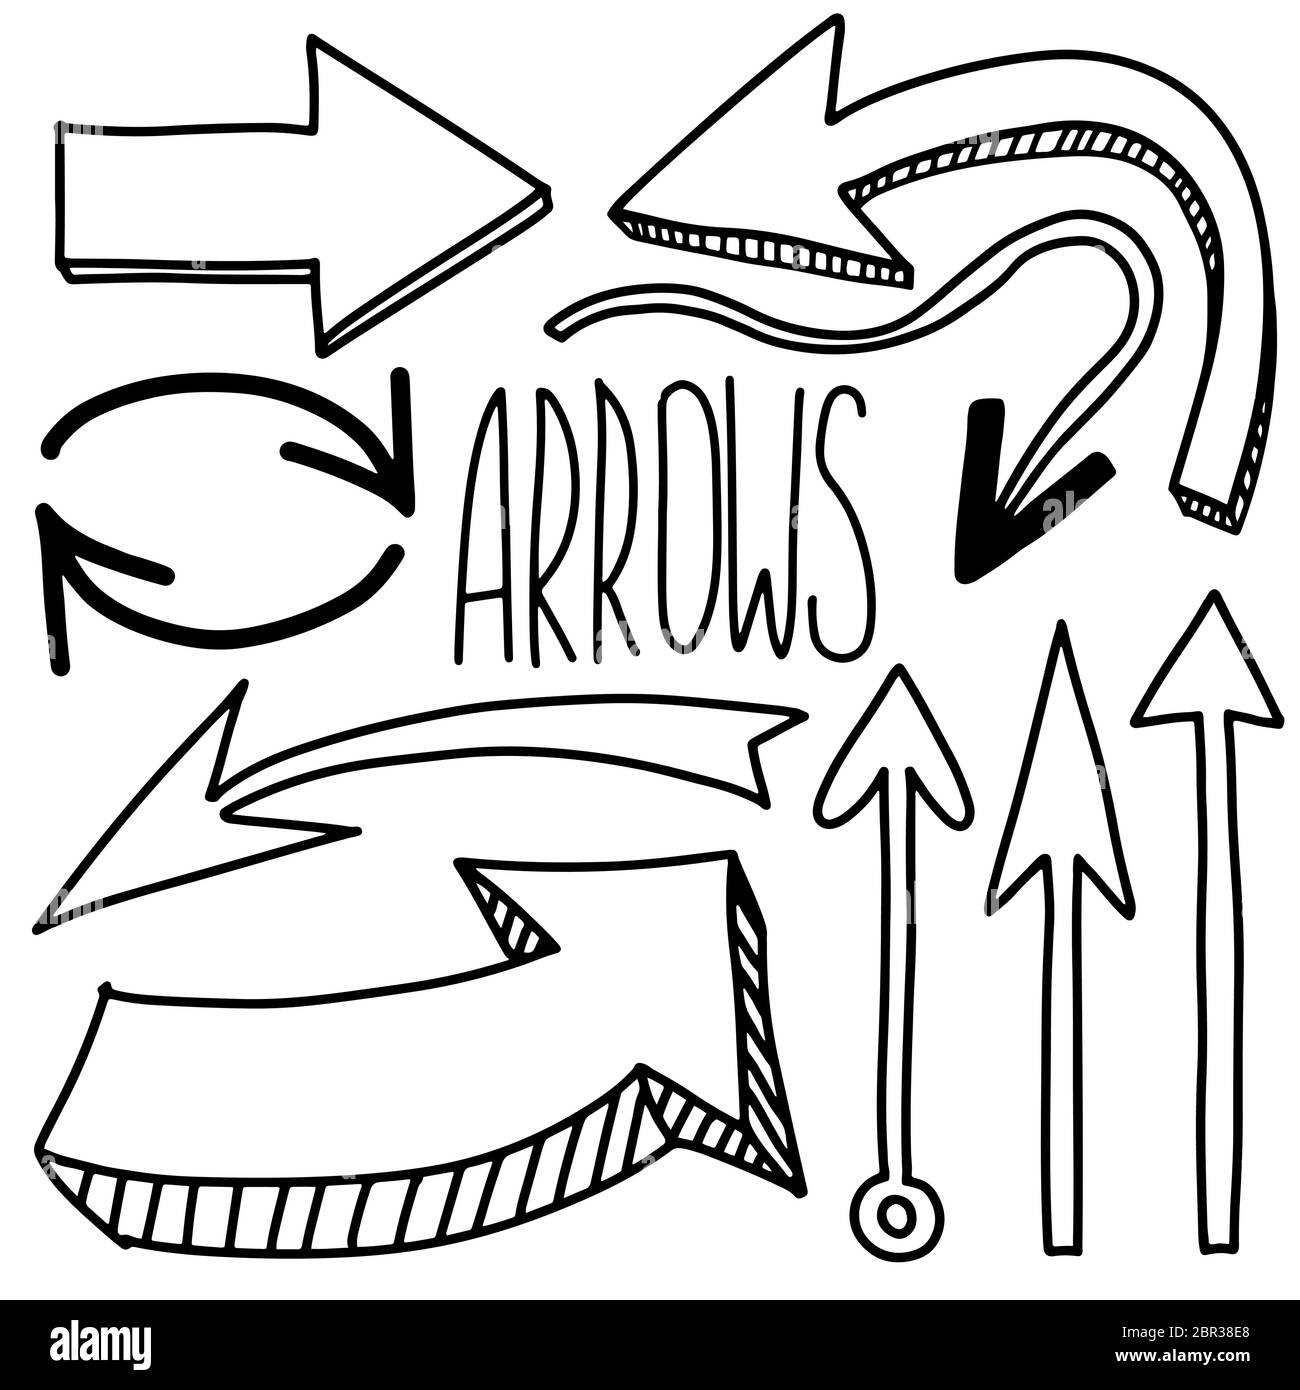 Doodle arrows icon set isolated on white. Grunge black Hand drawn arrow. Vector illustration Stock Vector